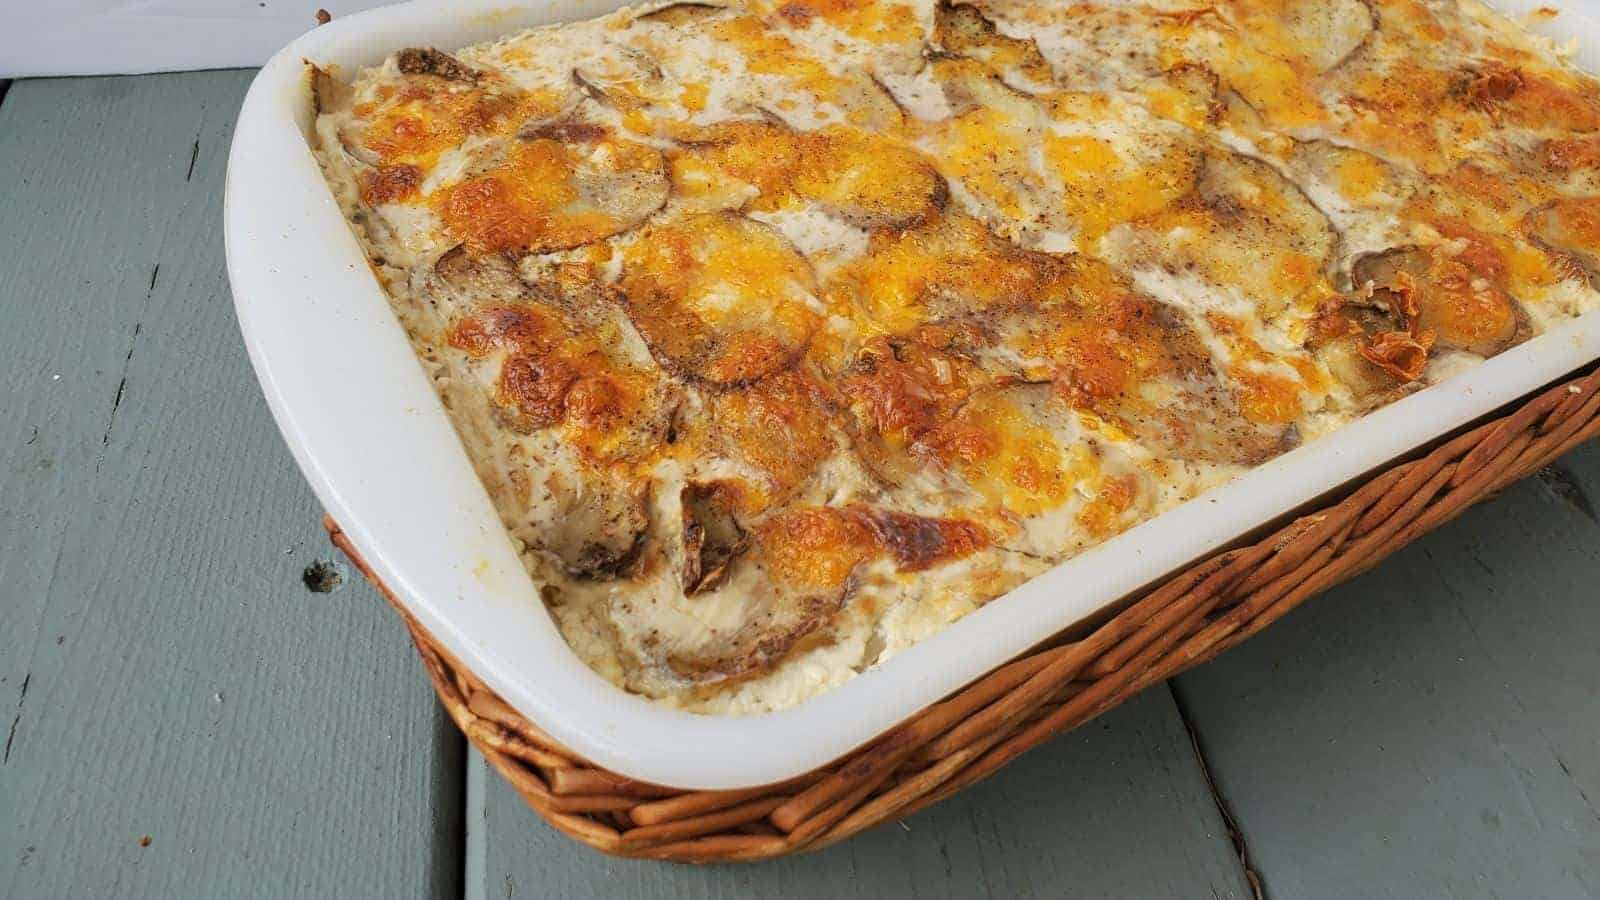 Cheesy scalloped potatoes in a casserole dish on a blue wooden table.